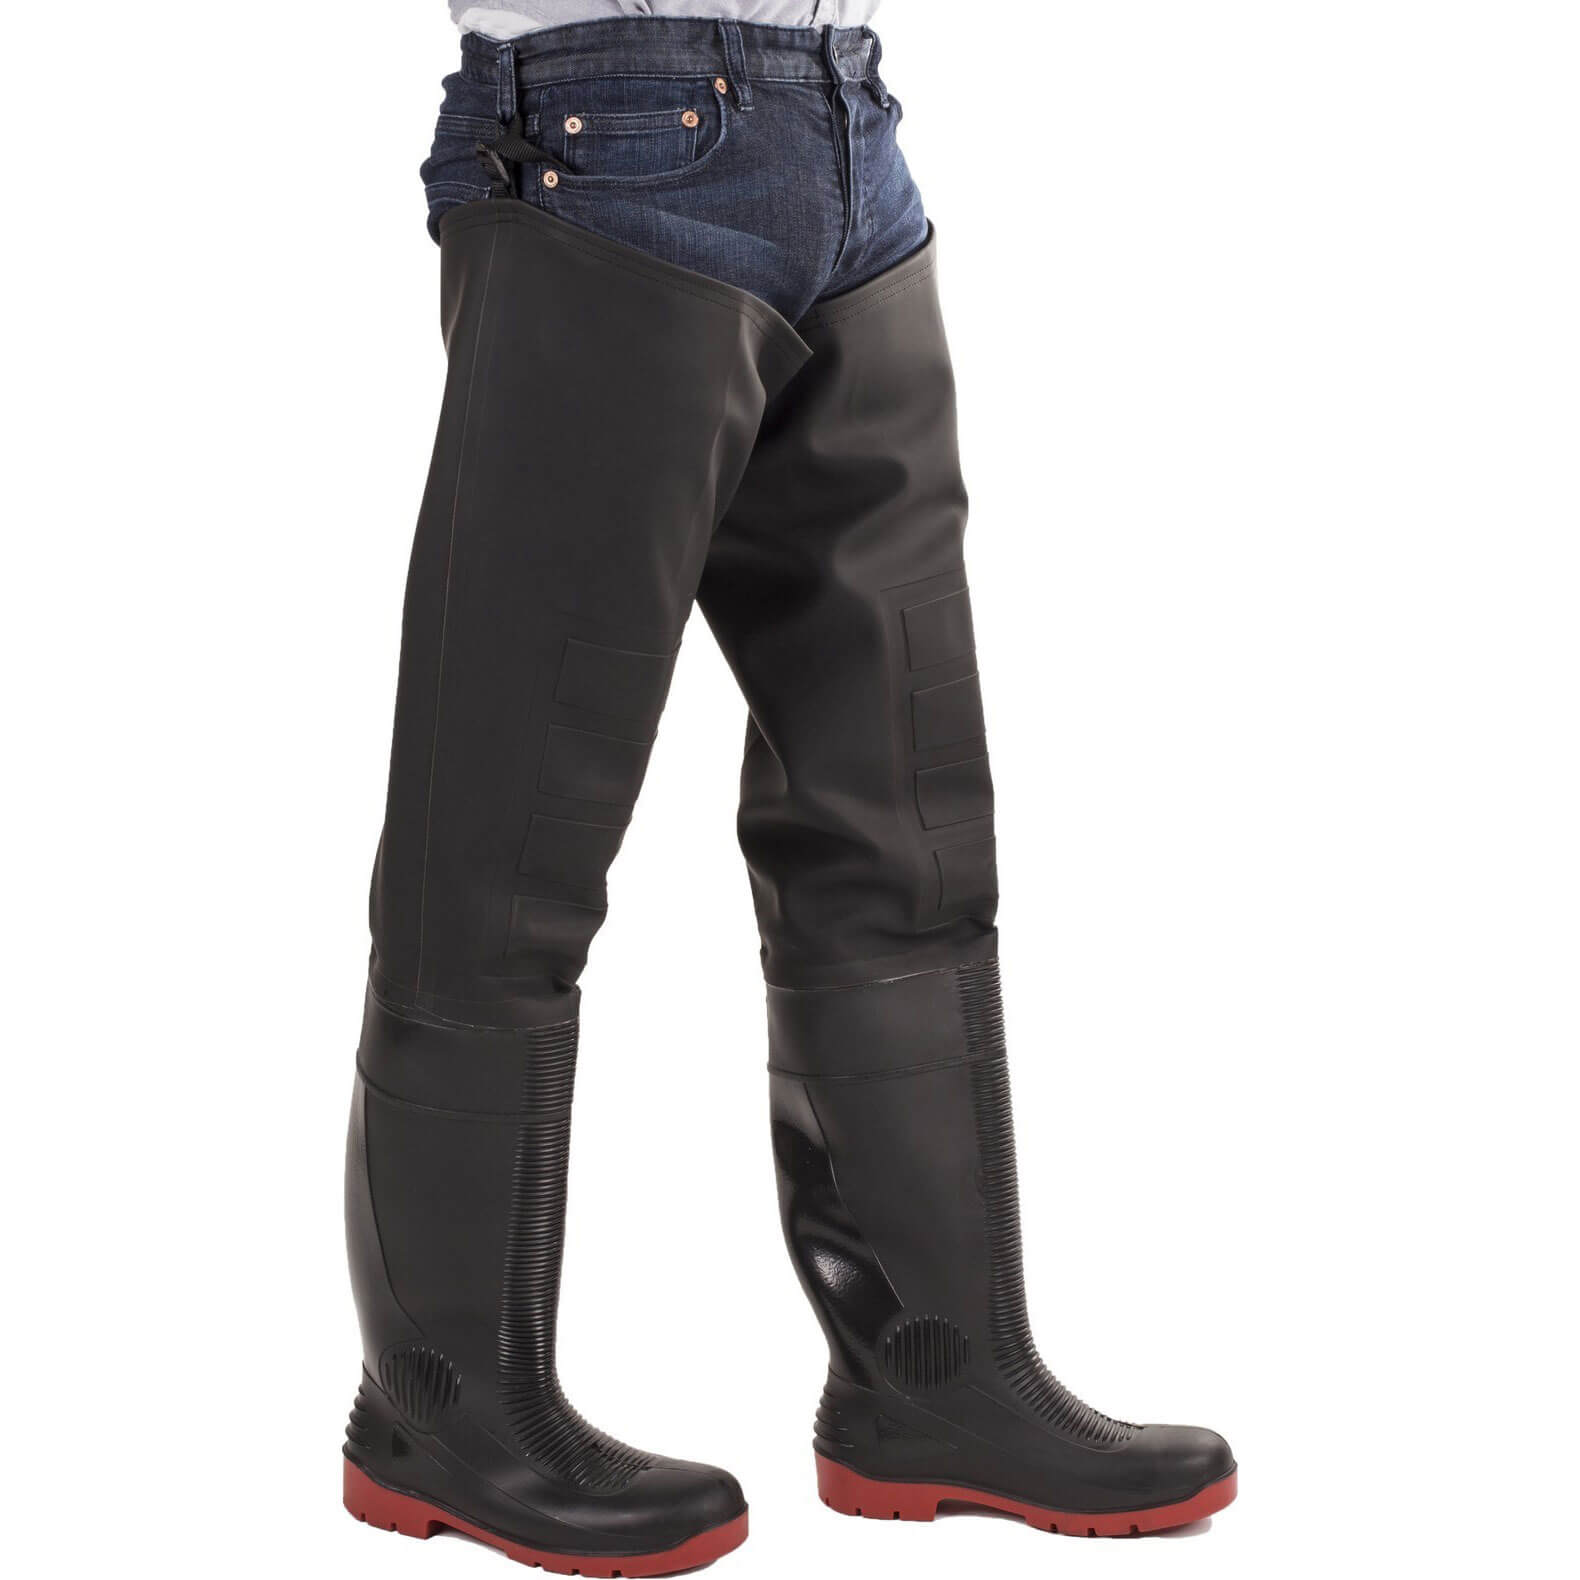 Image of Amblers Safety Rhone Thigh Safety Wader Black / Red Size 10.5